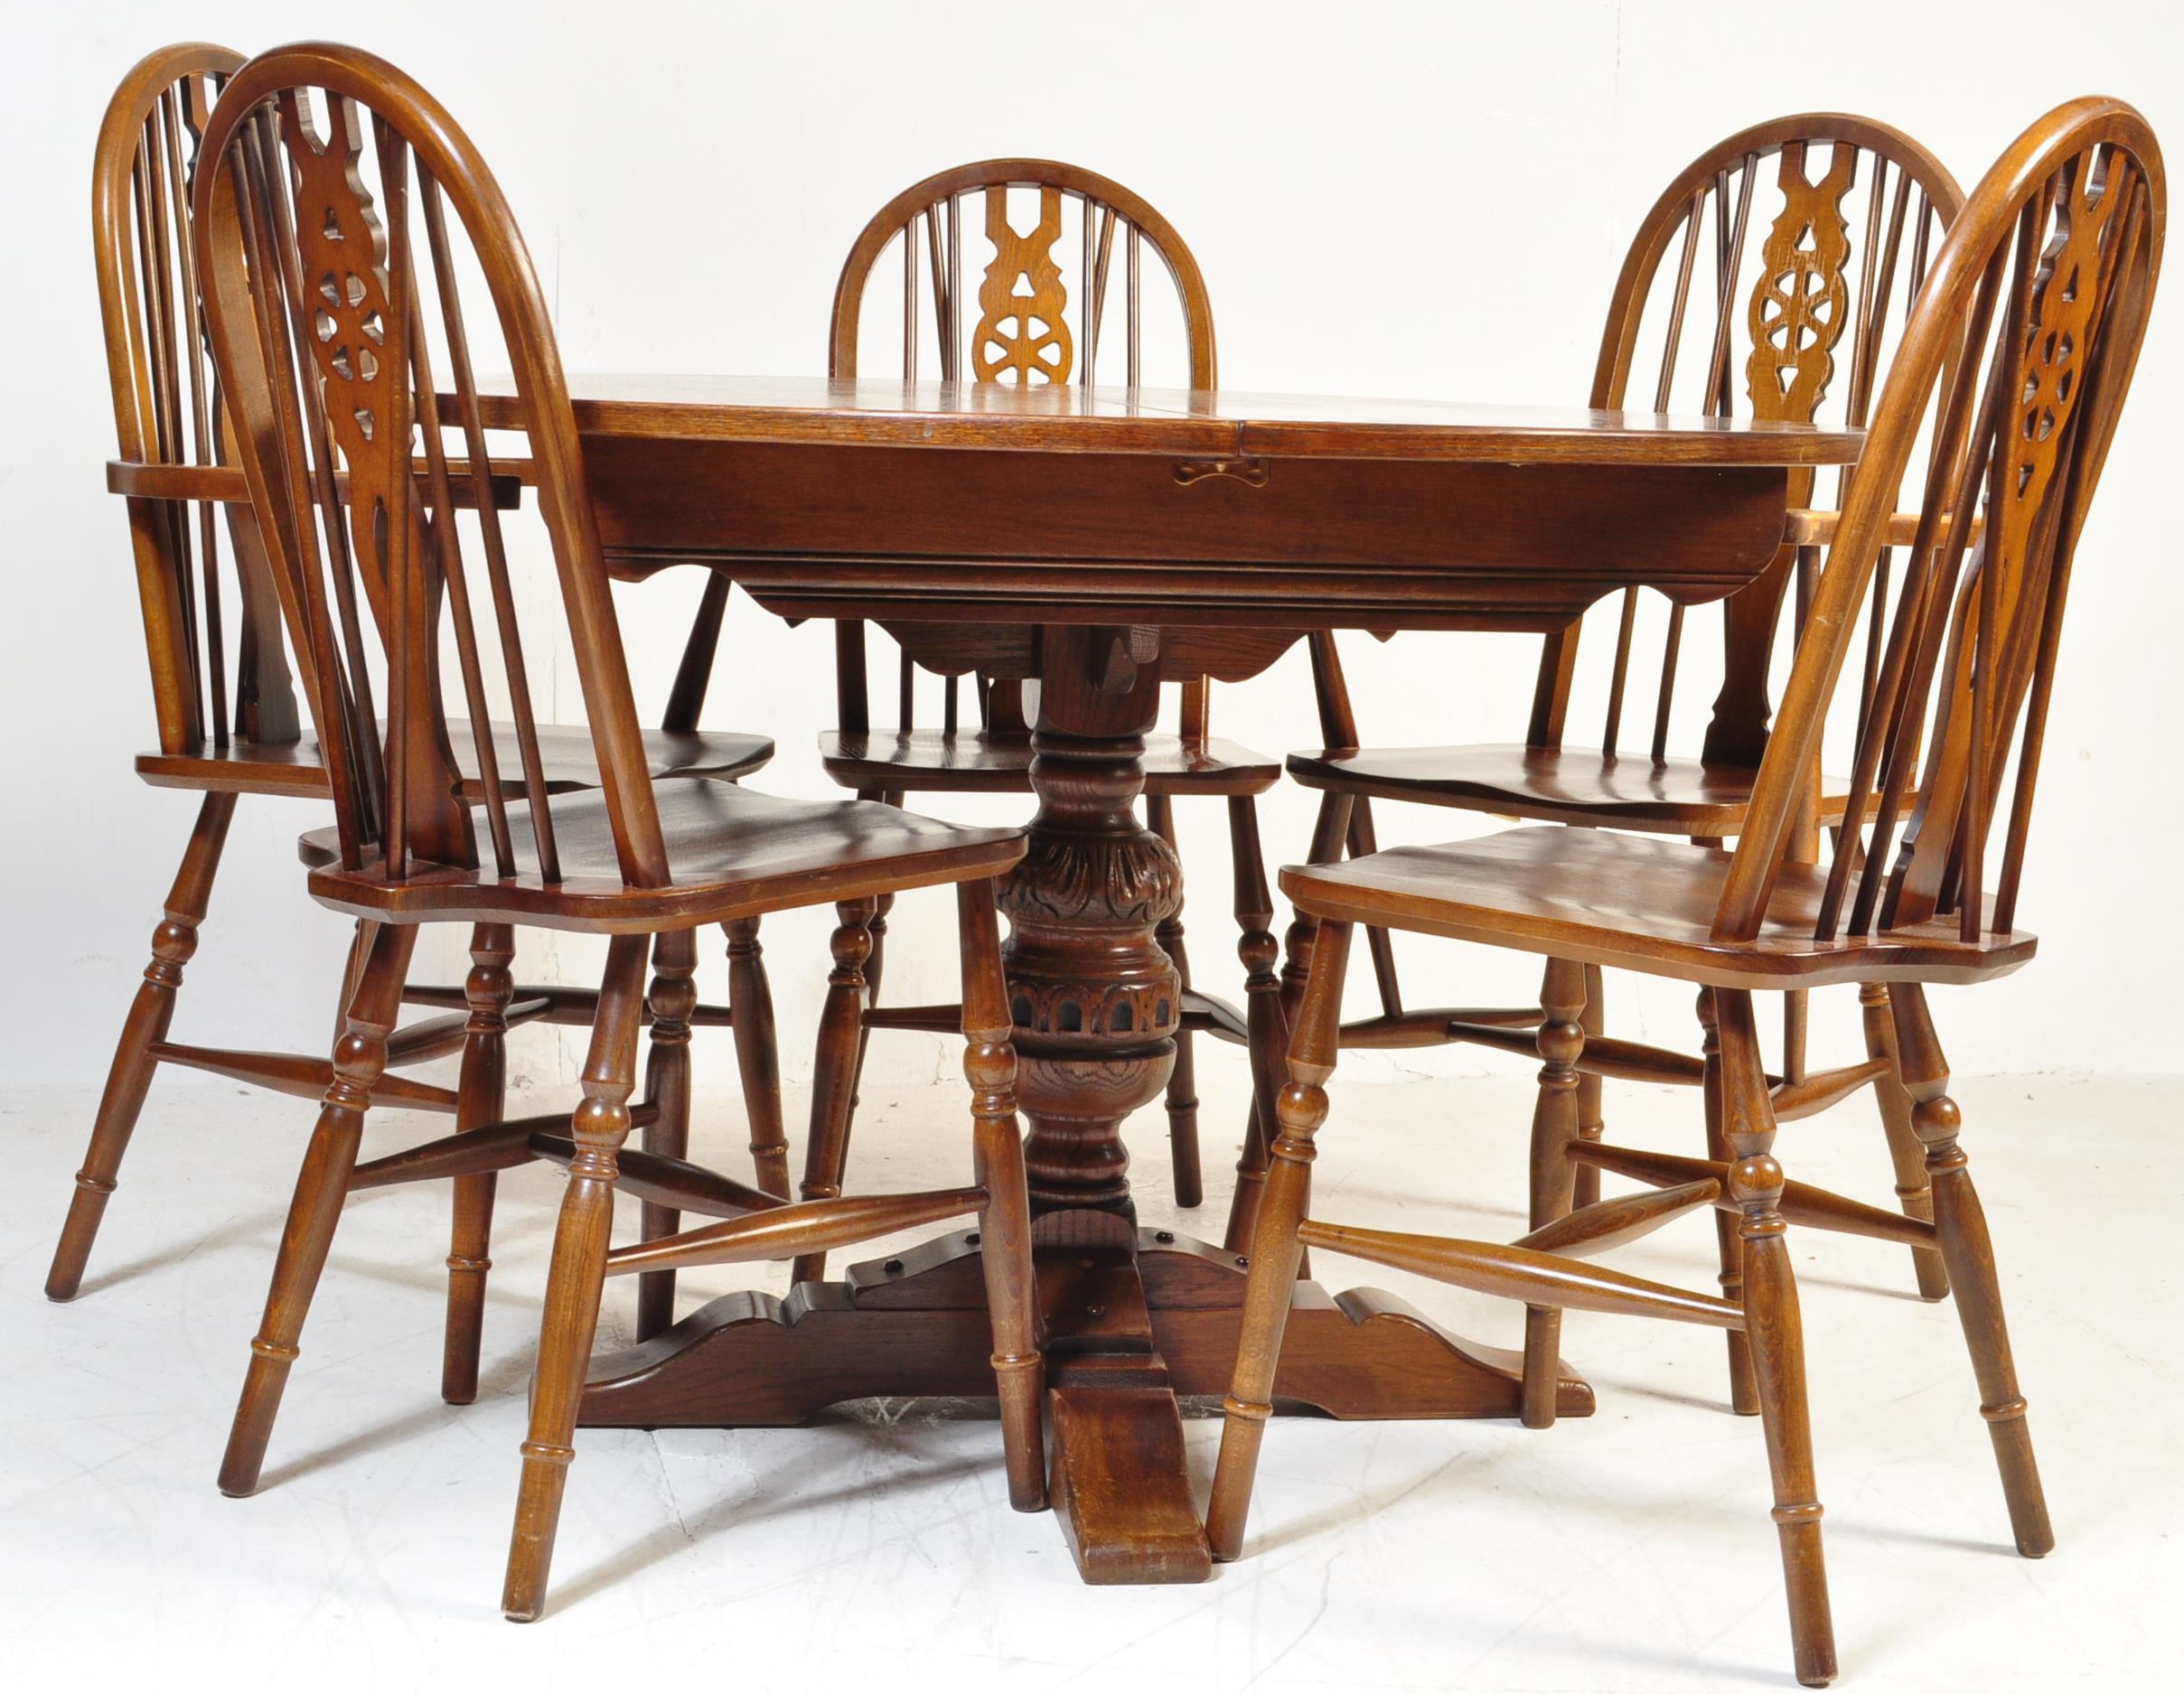 WOOD BROS OLD CHARM JACOBEAN REVIVAL DINING TABLE CHAIRS